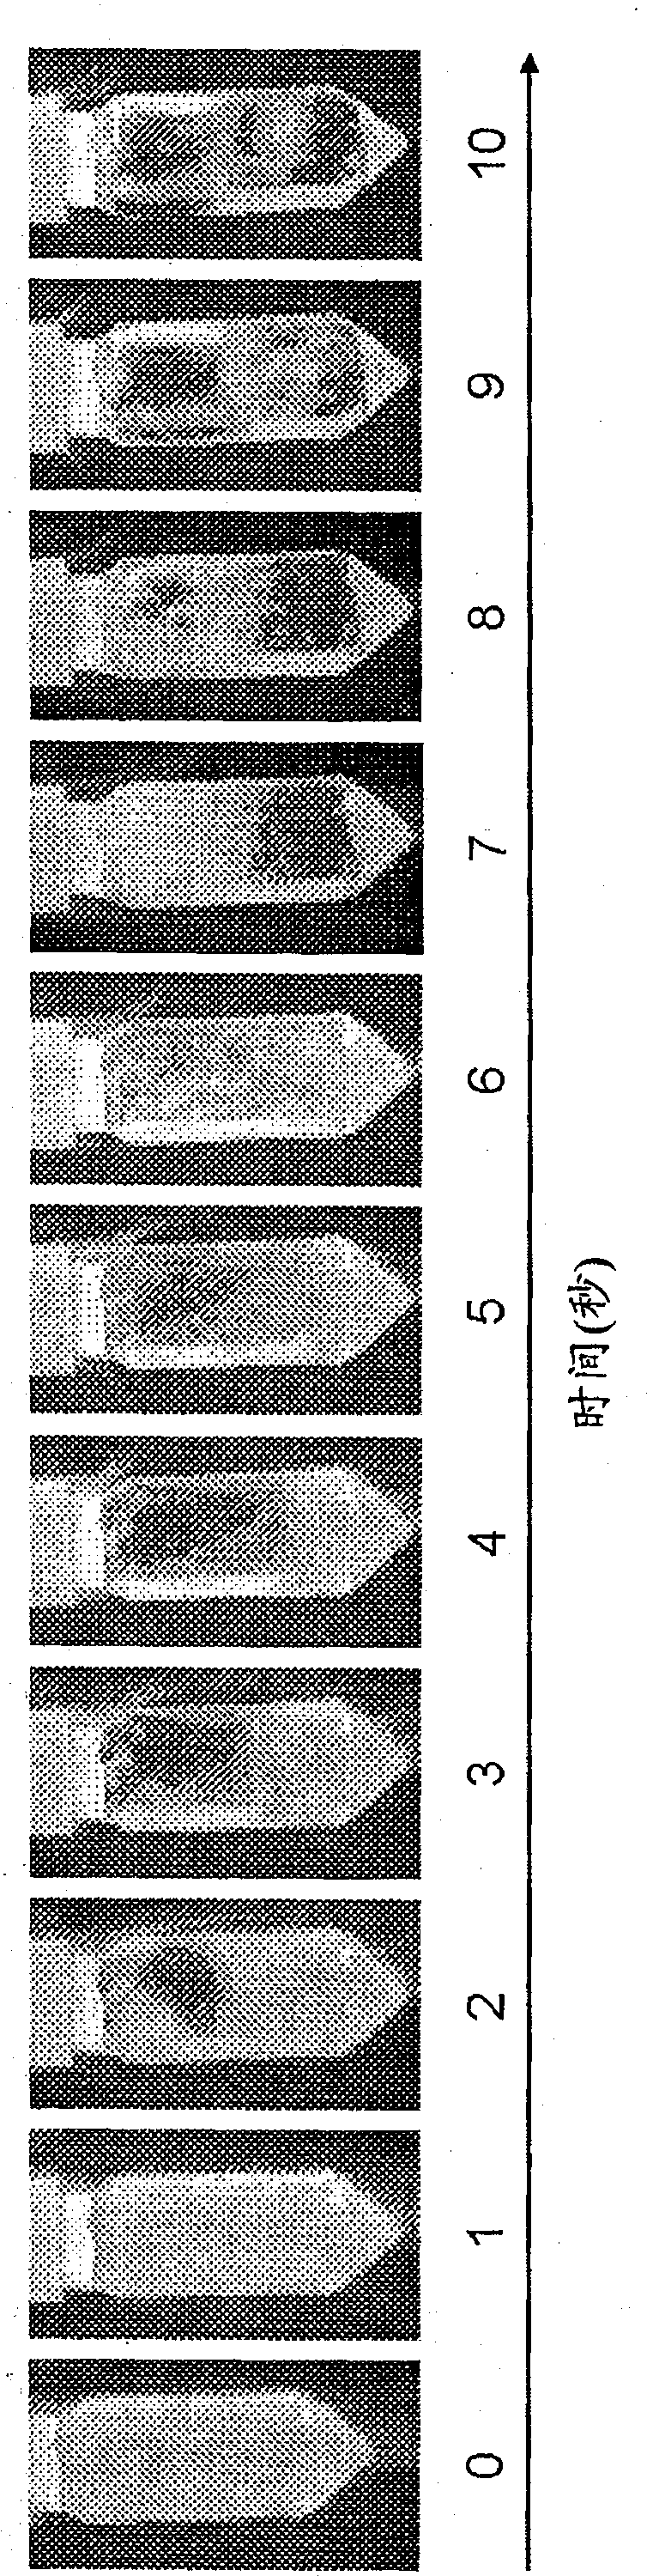 Apparatus for dissolving frozen polarized sample and applications